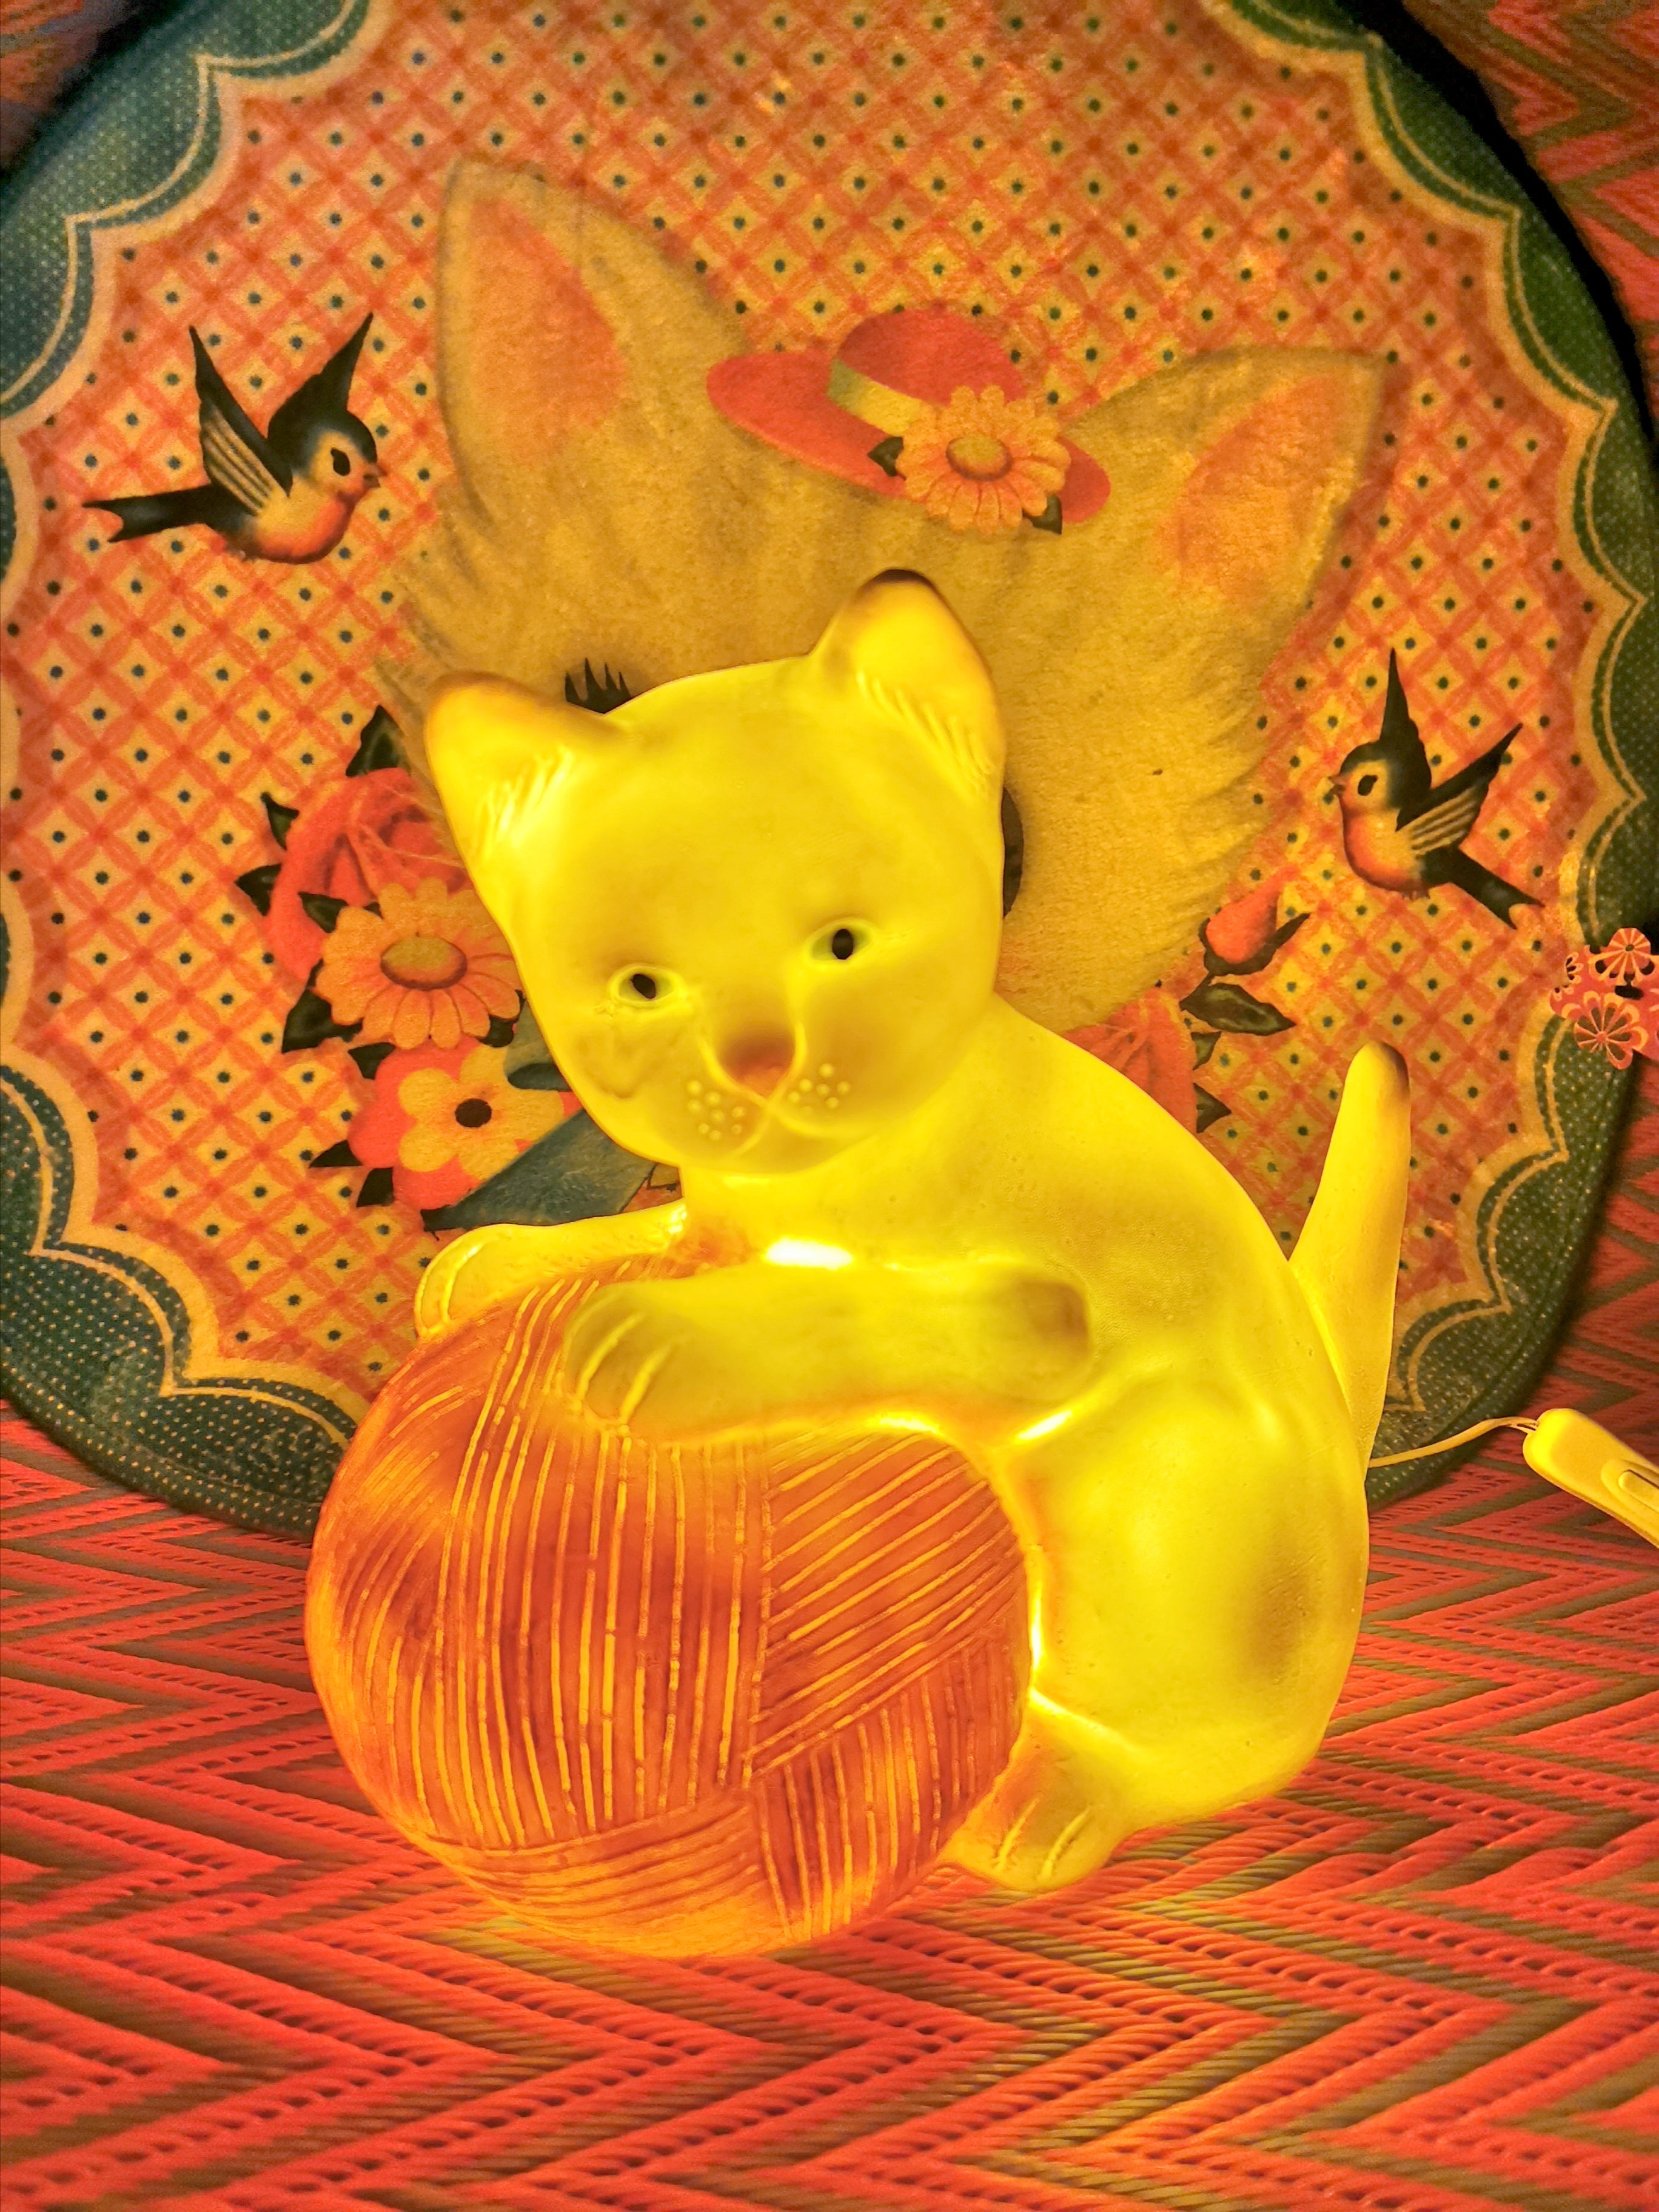 Pretty Puss cat lamp, playing with her ball of wool.!! Makes a great feature or night light. 

Made in Germany, hand decorated resin. 

LED light, UK plug. 

22cm x 23cm x 12cm.

